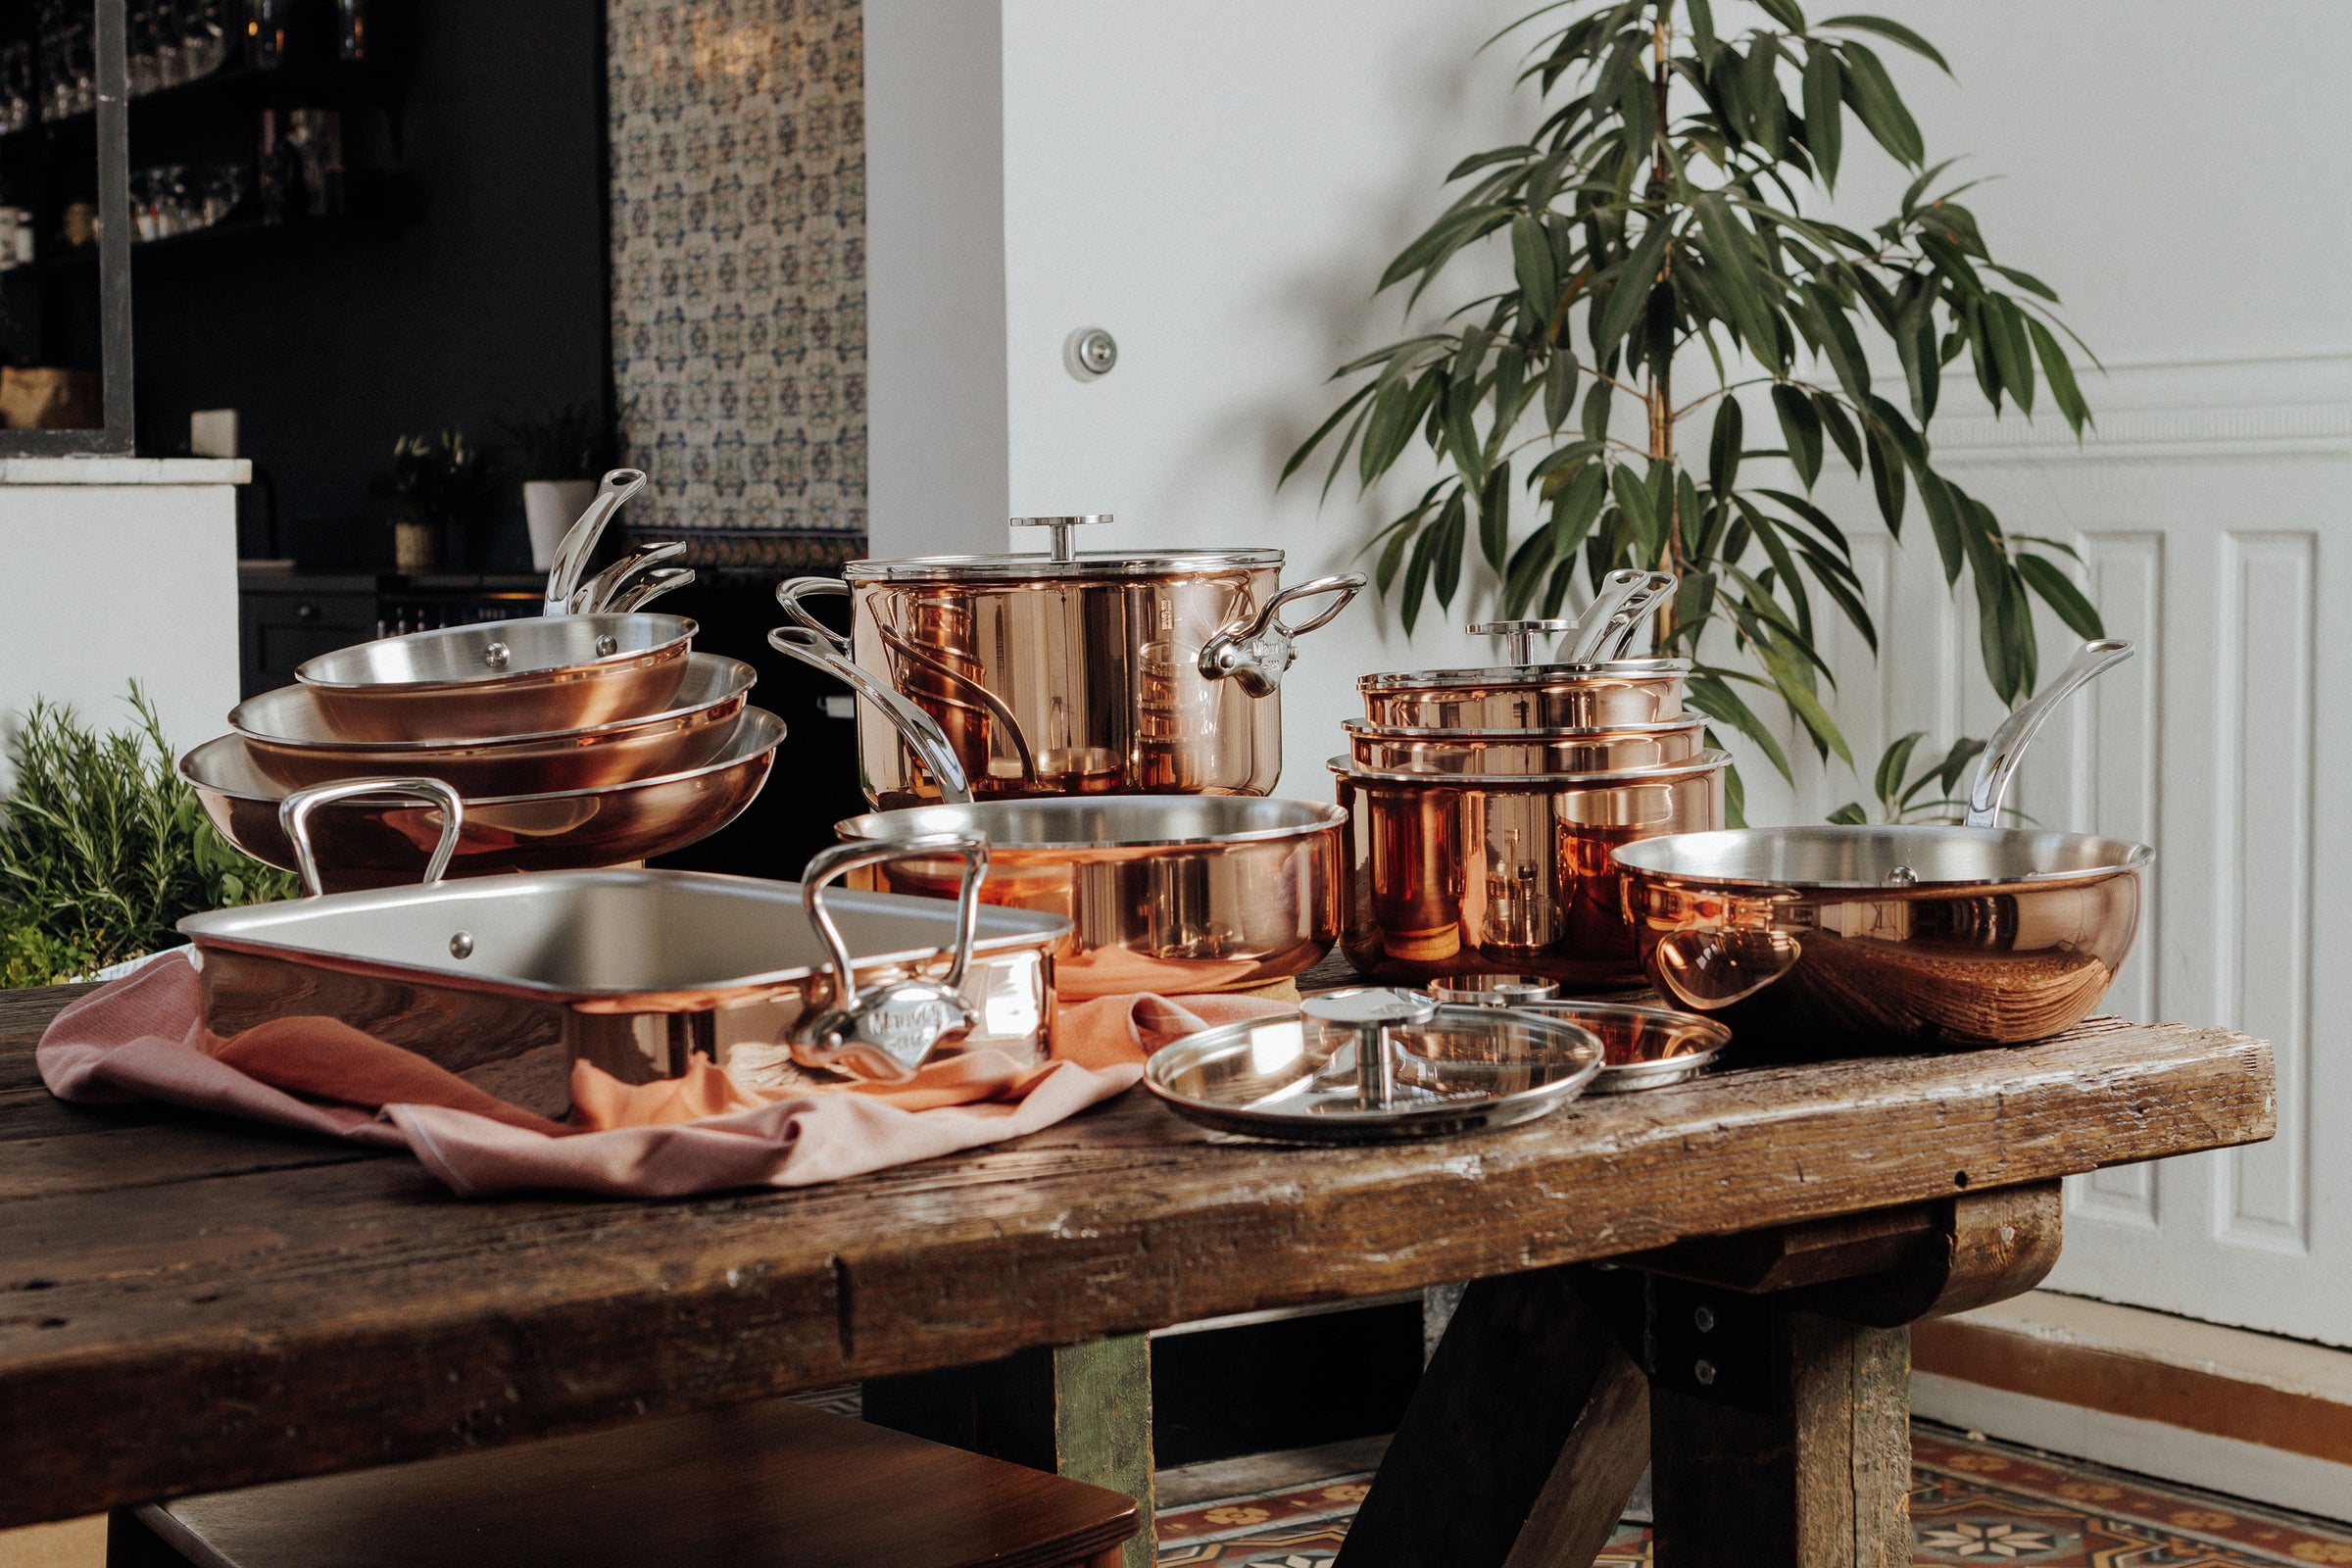 Shop All Handmade Cookware Archives - Hand Forged